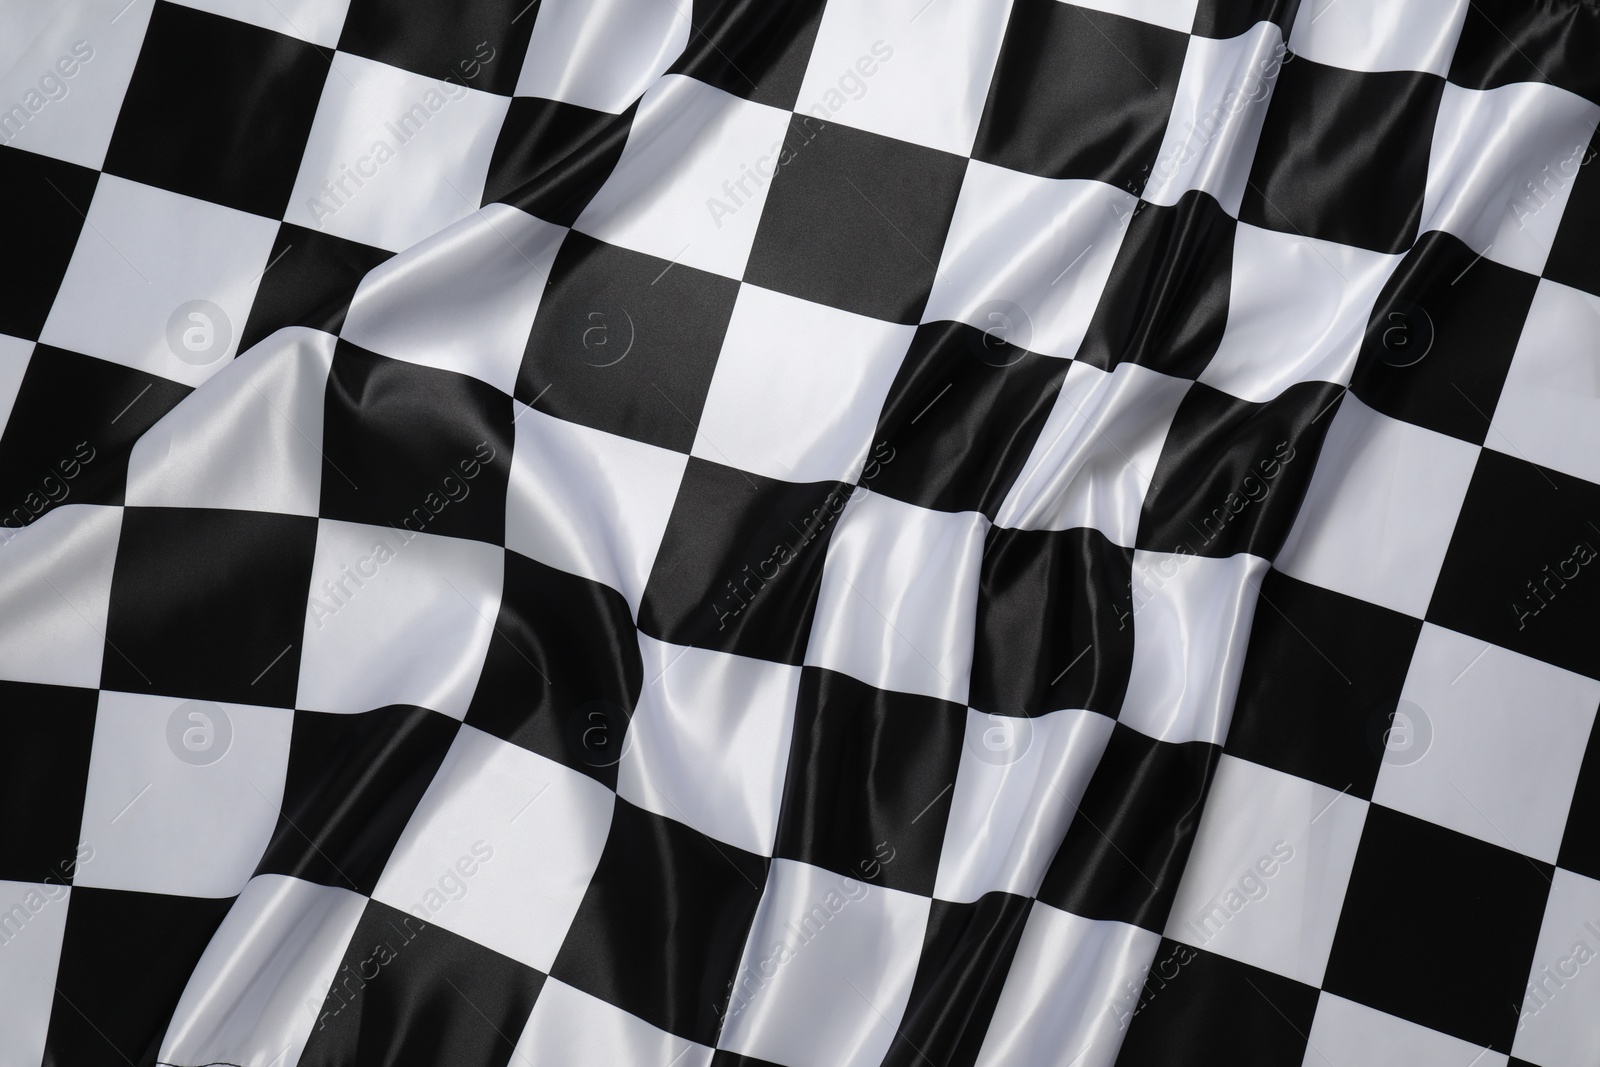 Photo of Checkered satin fabric as background, closeup view